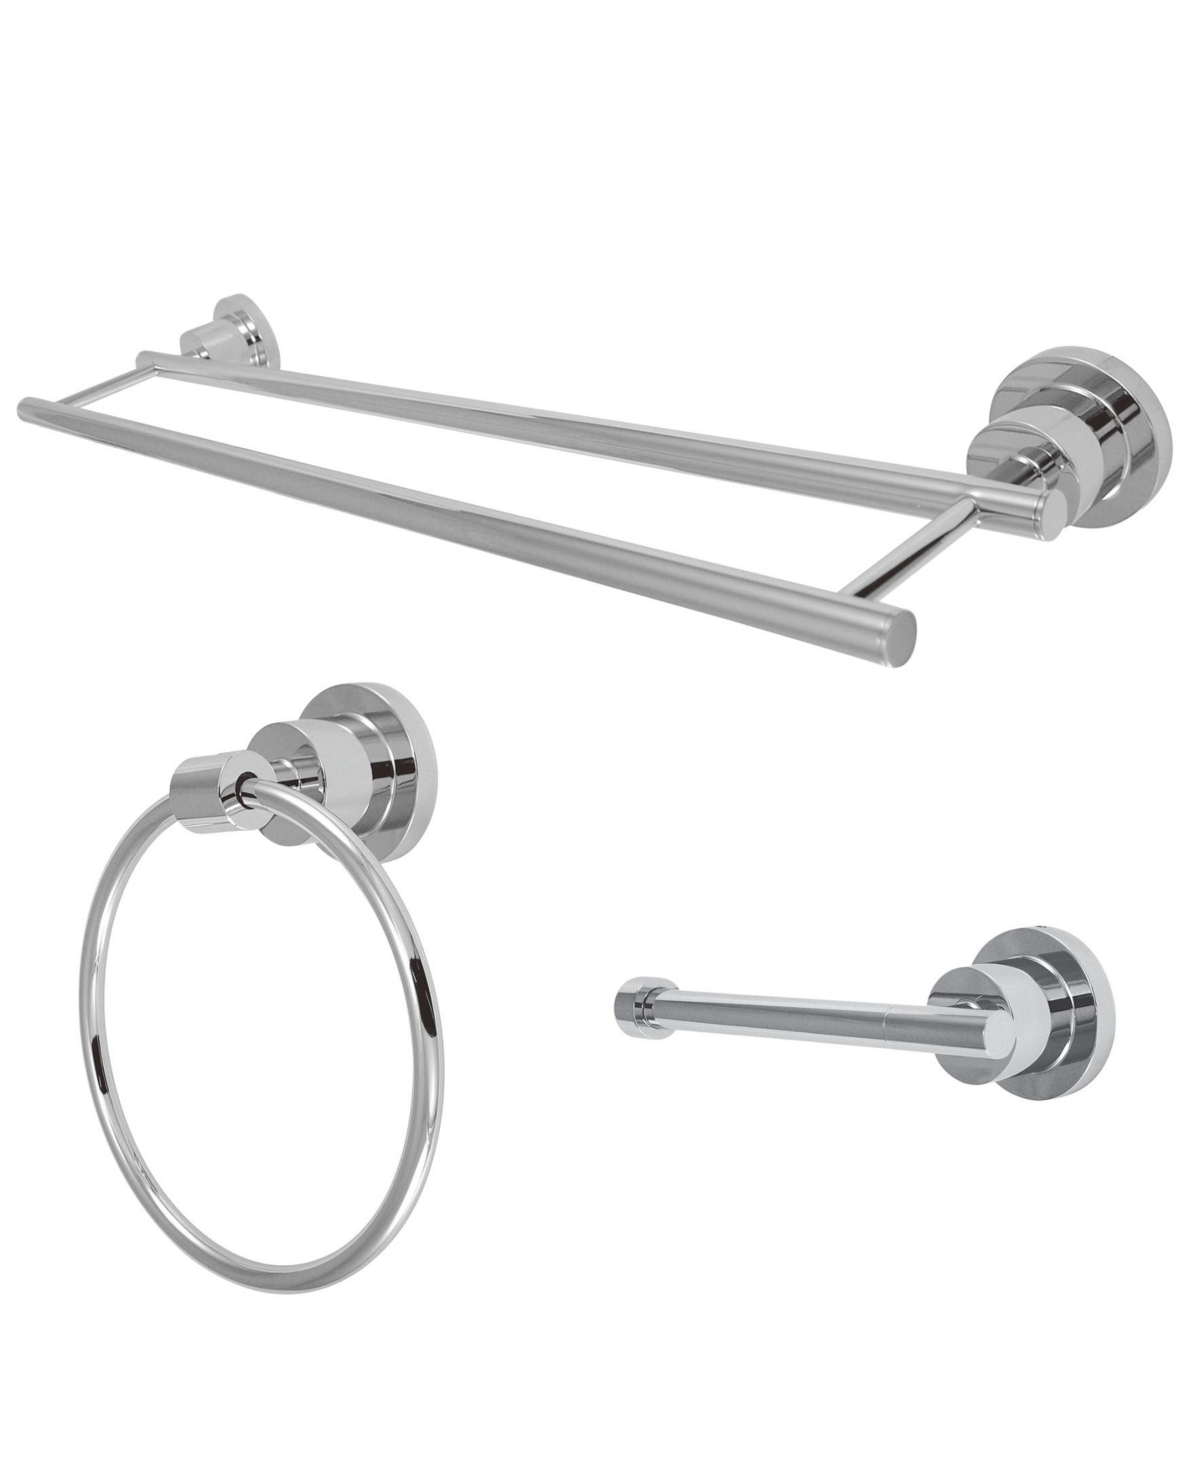 Kingston Brass Concord 3-Pc. Dual Towel Bar Bathroom Accessories Set in Polished Chrome Bedding